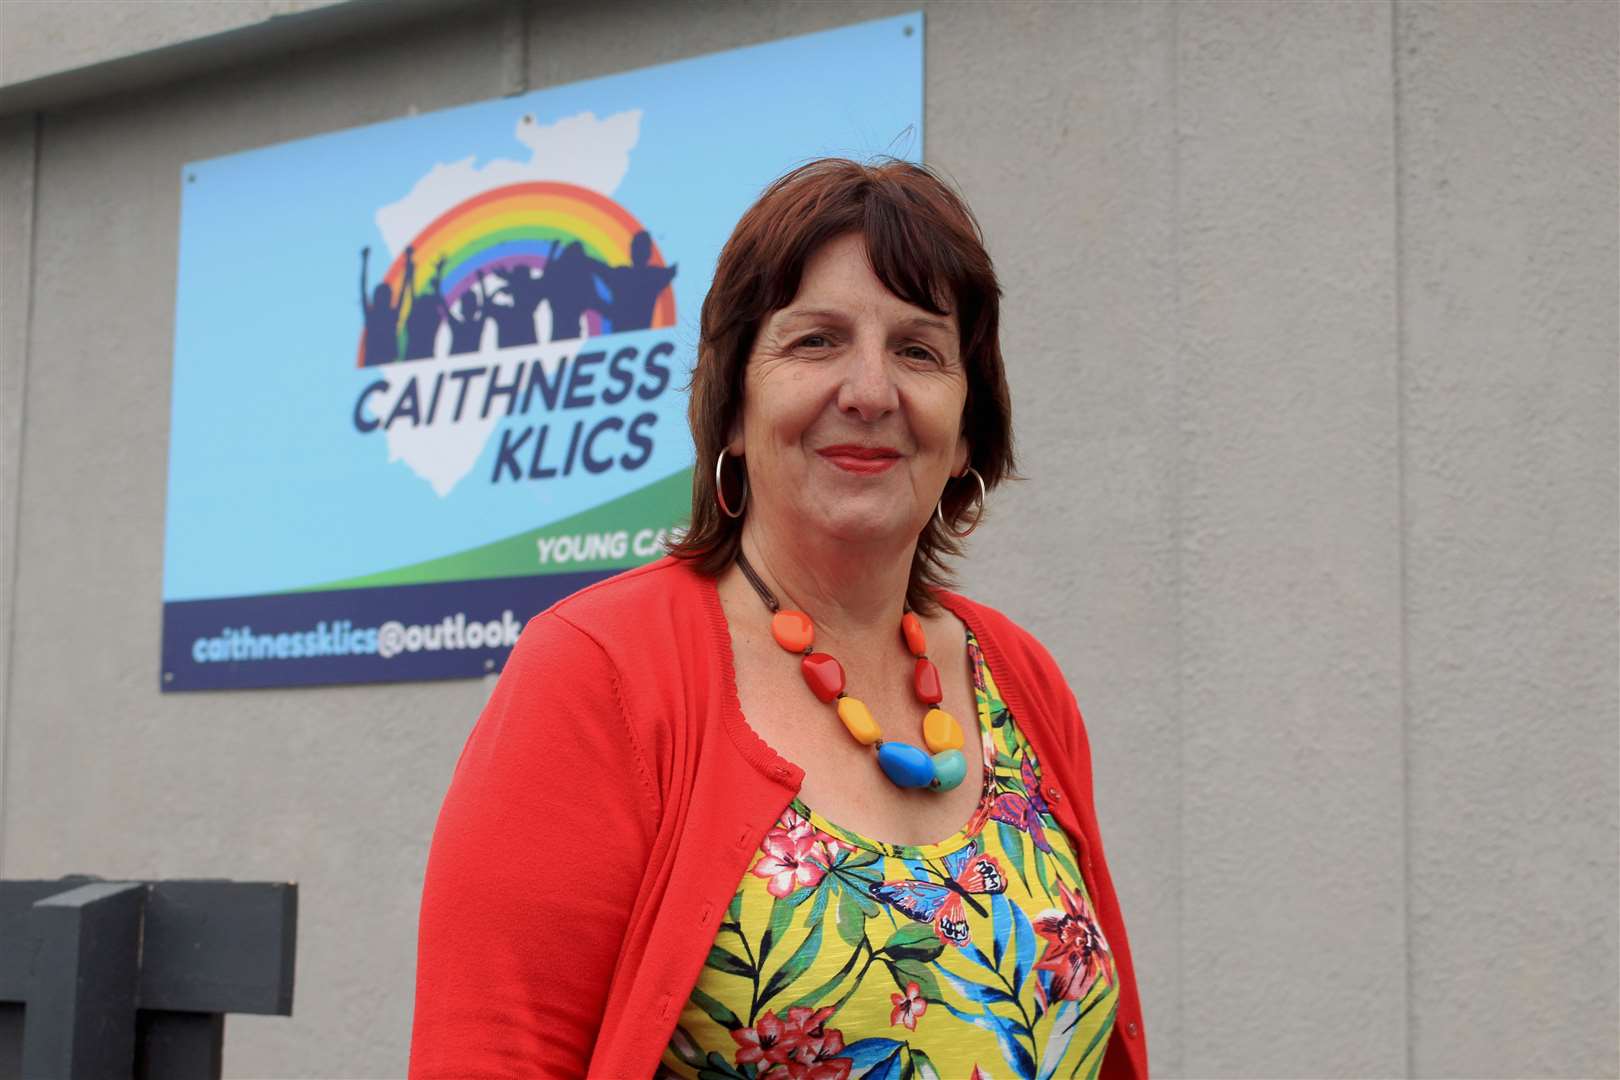 Pat Ramsay, vice-chairperson of Caithness Klics, says the open meeting will allow everyone's voice to be heard.